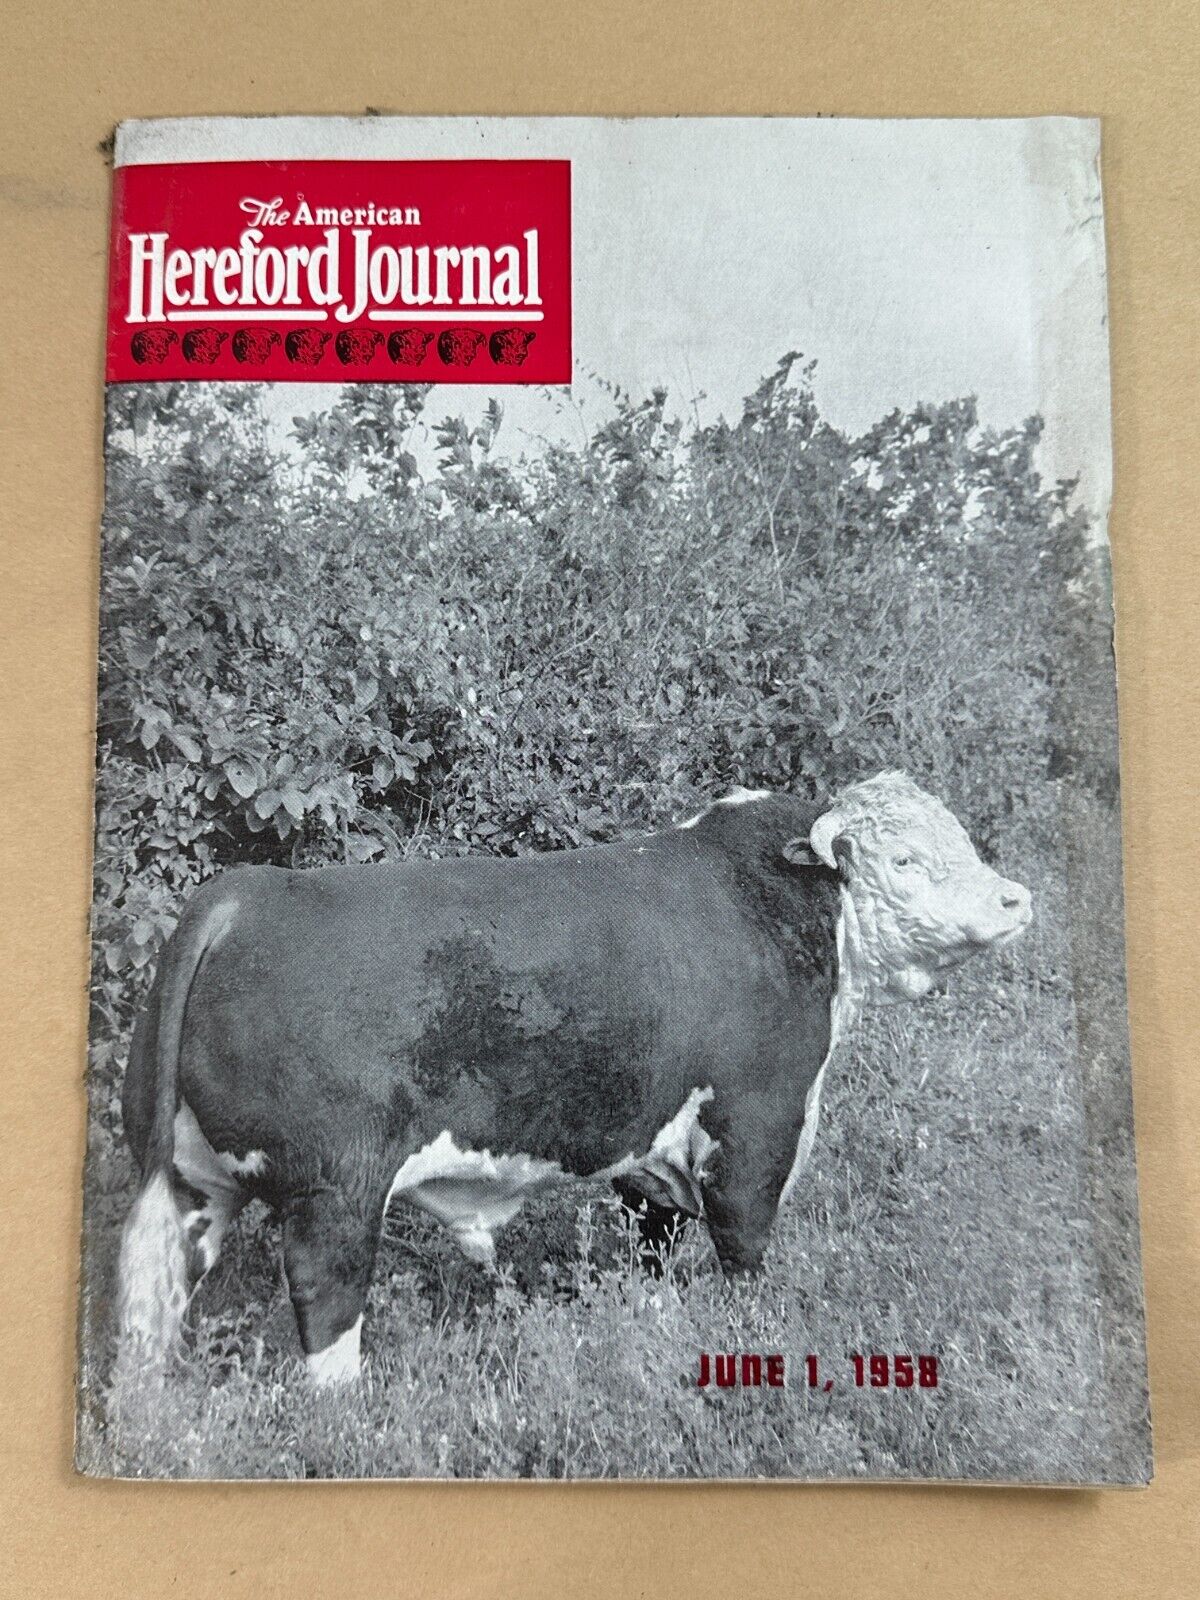 June 1, 1958 American Hereford Journal magazine - ads, photos, articles, etc